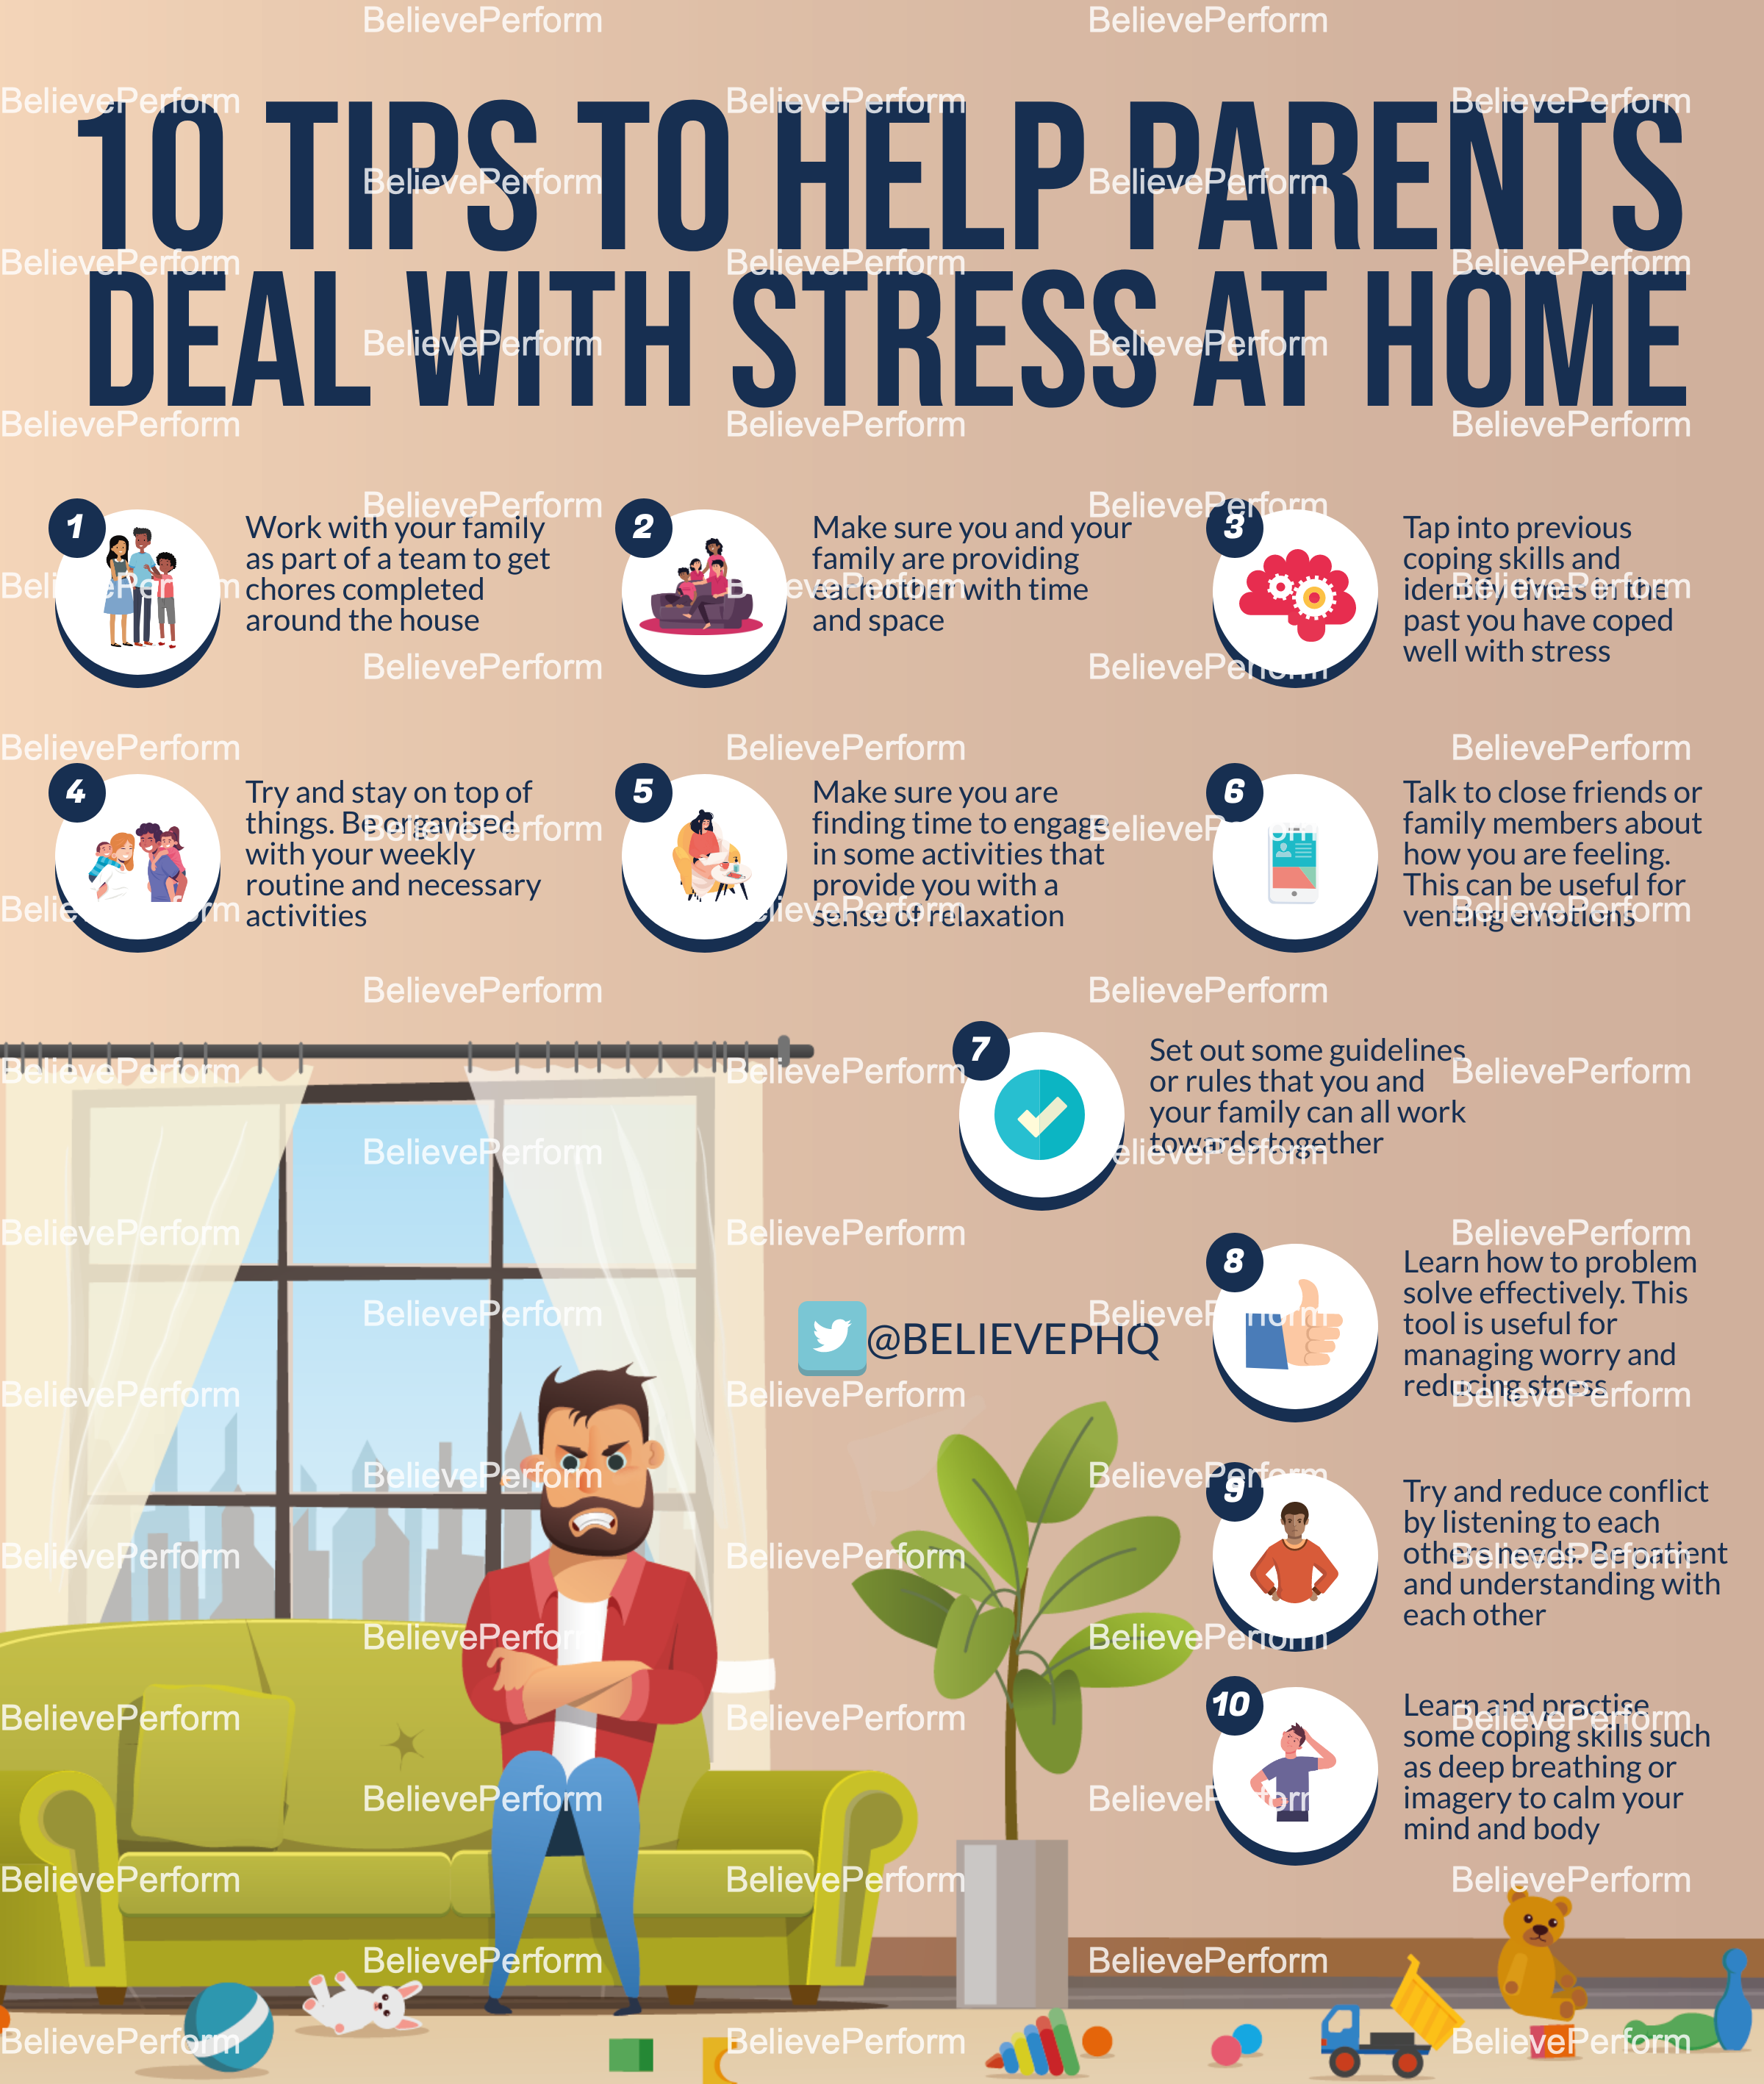 https://members.believeperform.com/wp-content/uploads/2020/07/10-tips-to-help-parents-deal-with-stress-at-home.png